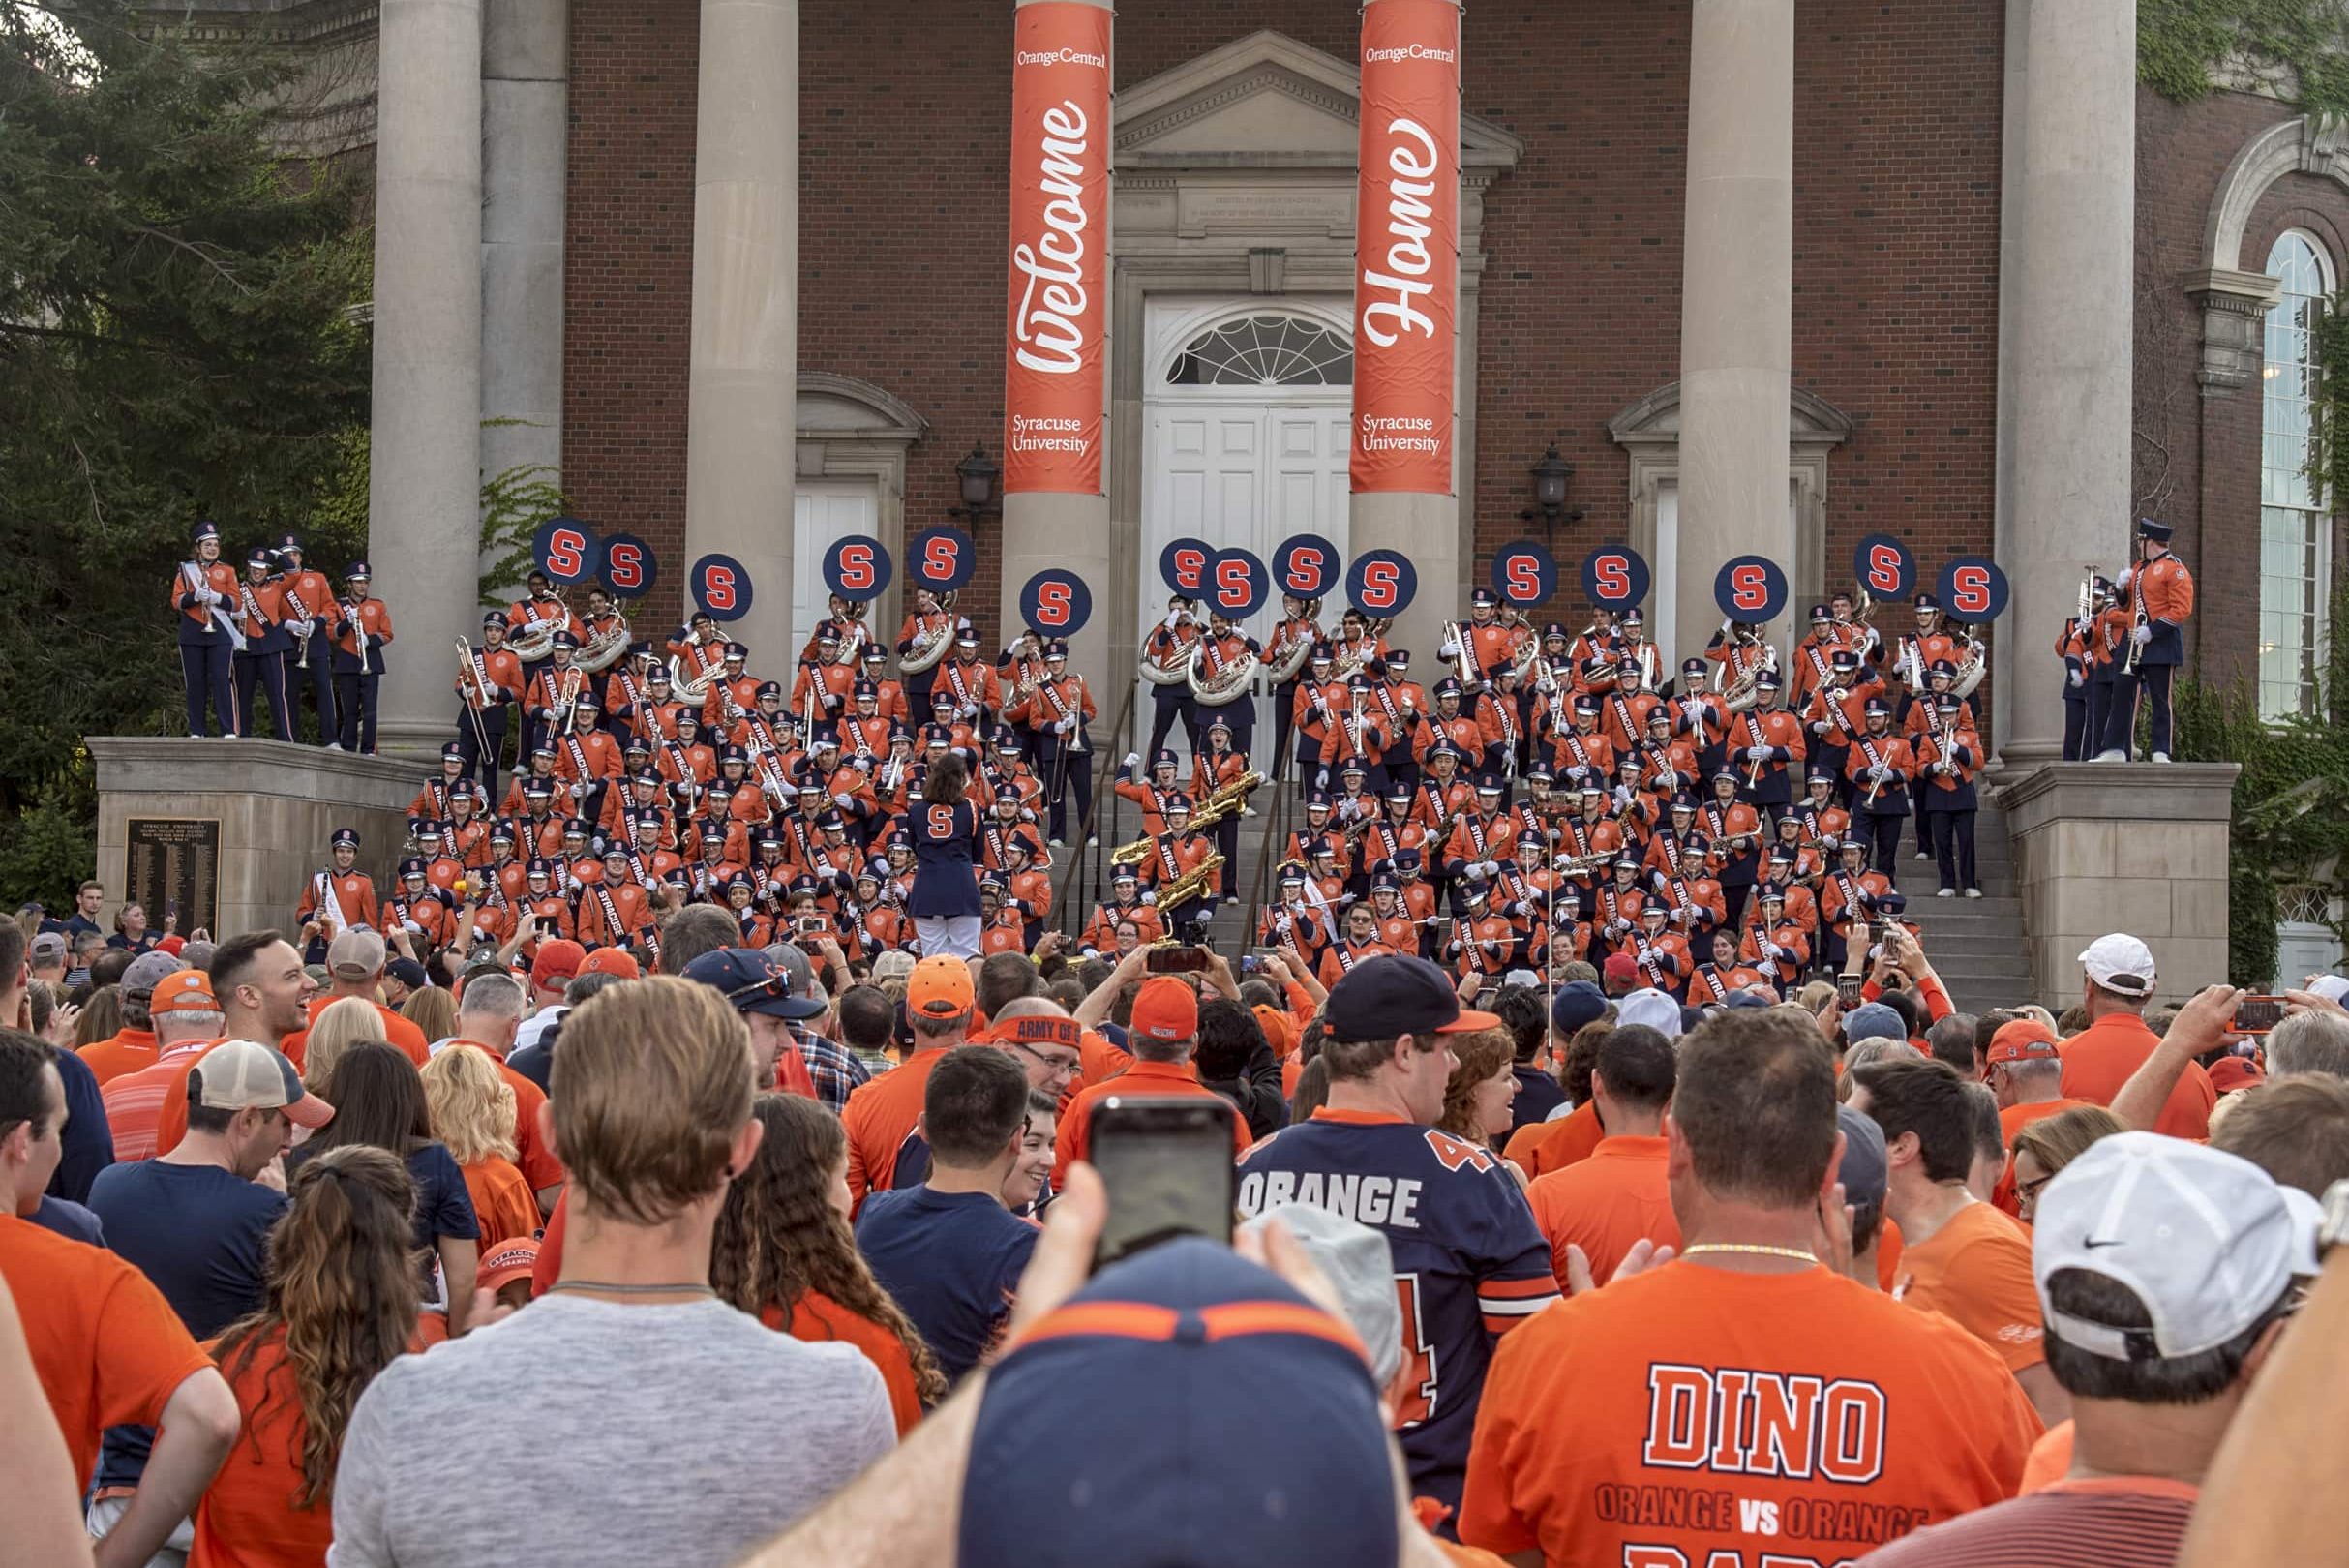 The Syracuse University Marching Band plays for fans, alumni, students and family members near the Orange Central Tailgate before the SU Oranges vs. Clemson Tigers football game. The event, hosted by the SU Alumni Association, is the first at-home tailgate of the 2019 football season.